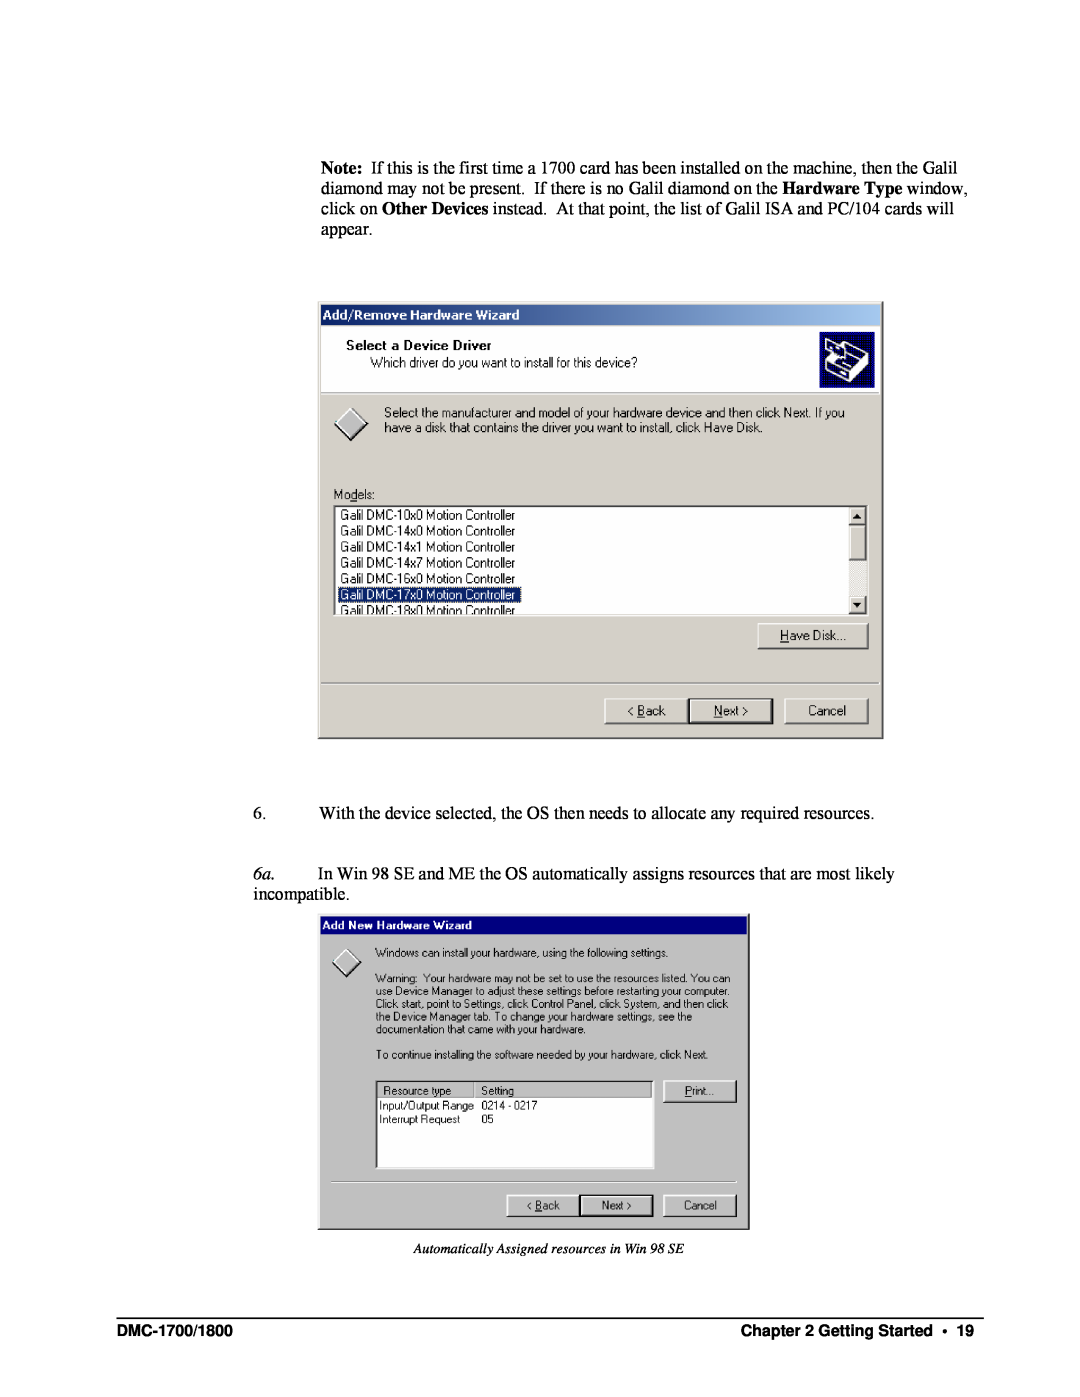 Galil DMC-1700, DMC-1800 user manual Automatically Assigned resources in Win 98 SE 